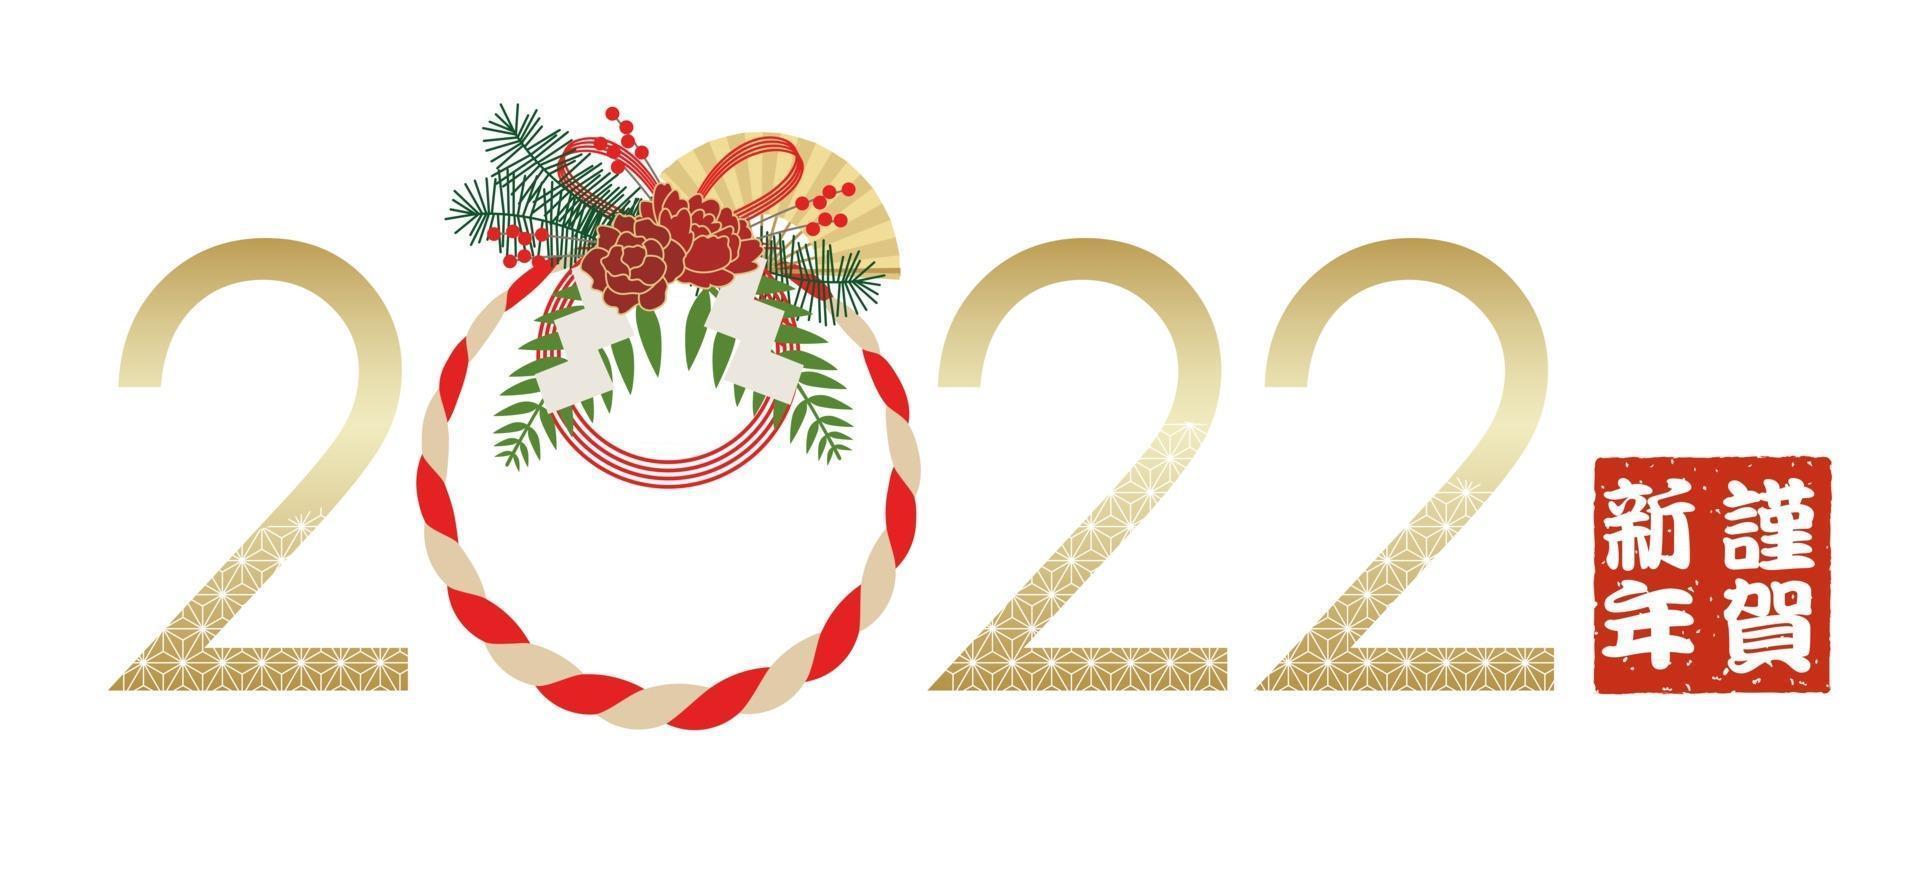 The Year 2022 Logo With A Japanese Straw Festoon Decoration Celebrating The New Year. Vector Illustration Isolated On A White Background. Text translation - Happy New Year